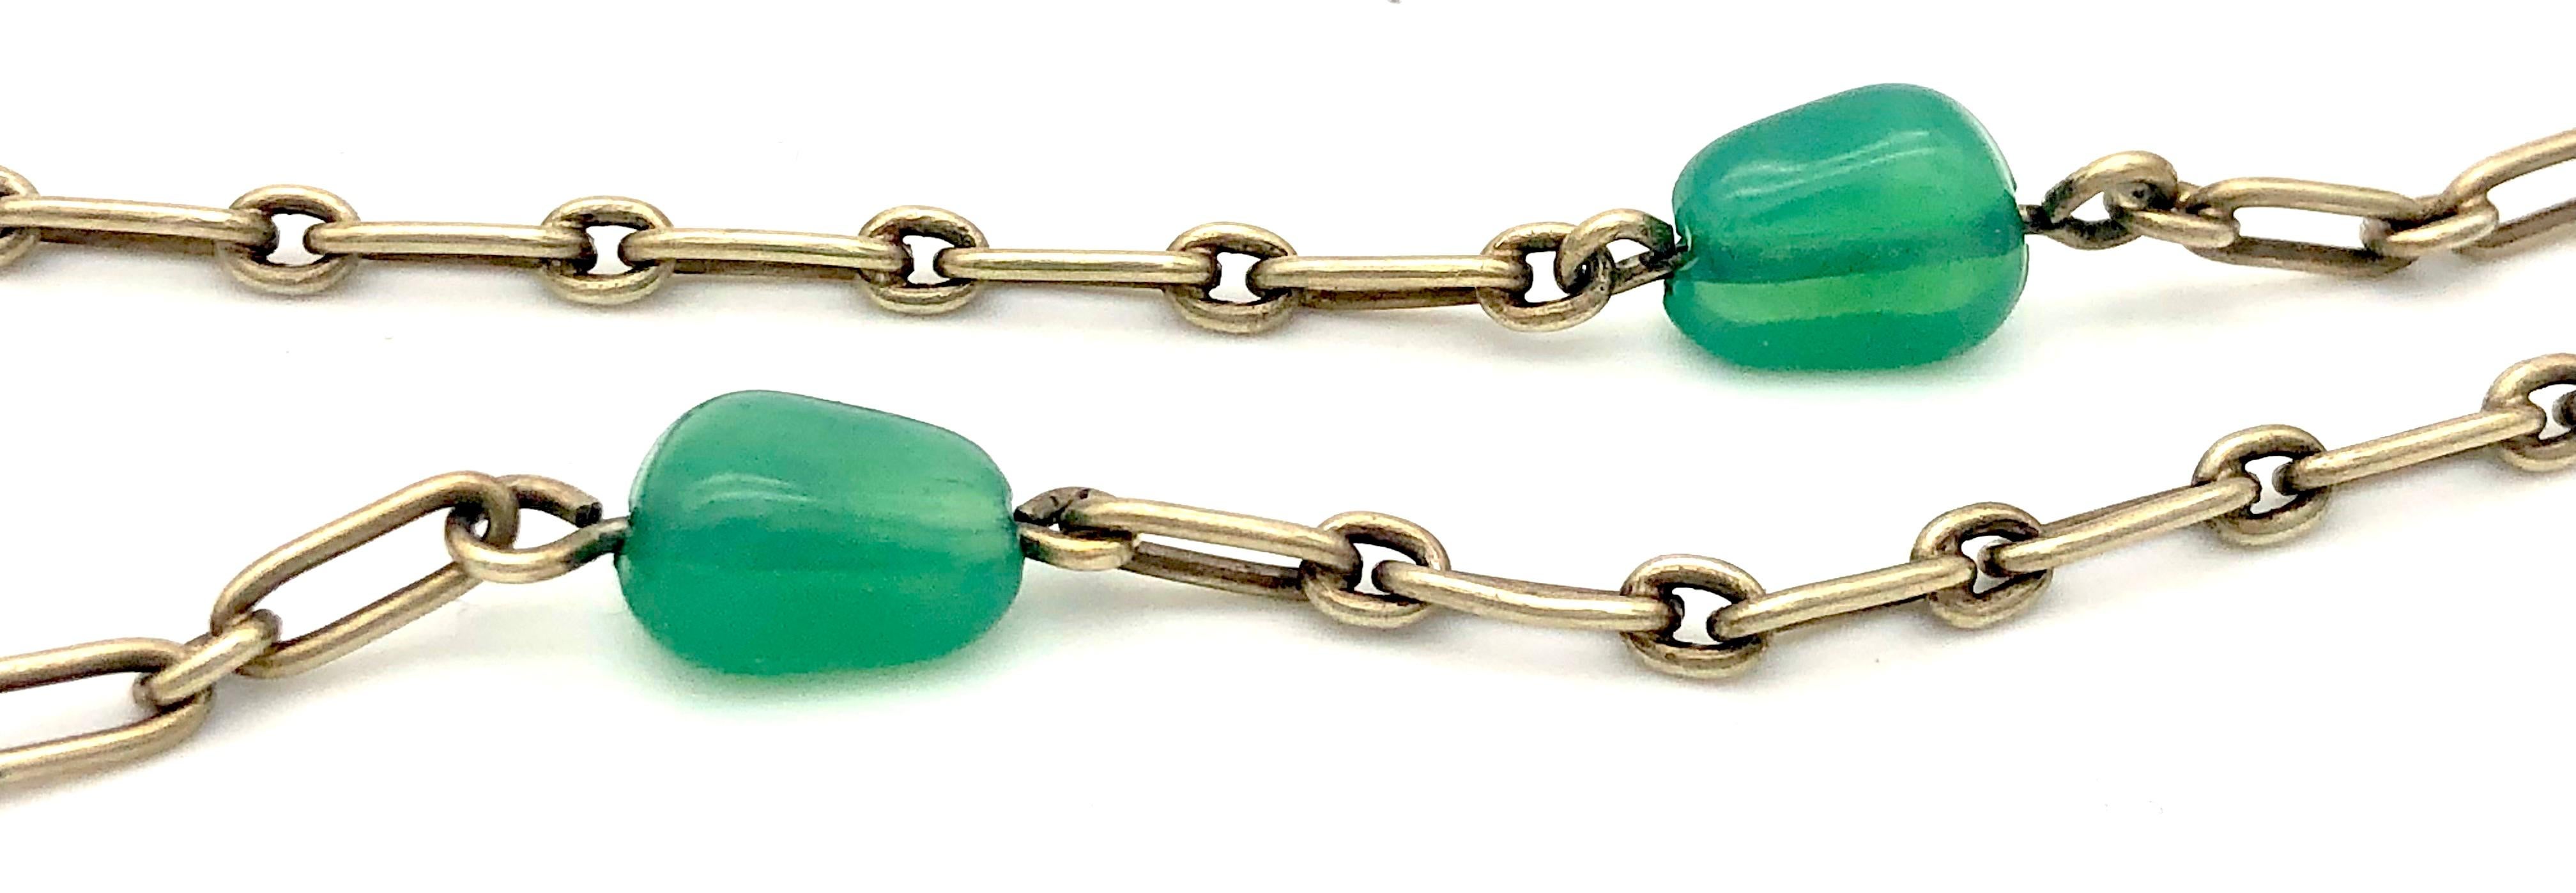 Antique Belle Époque Long Guard Chain Silver Muff Chain  Chrysoprase Beads In Good Condition For Sale In Munich, Bavaria